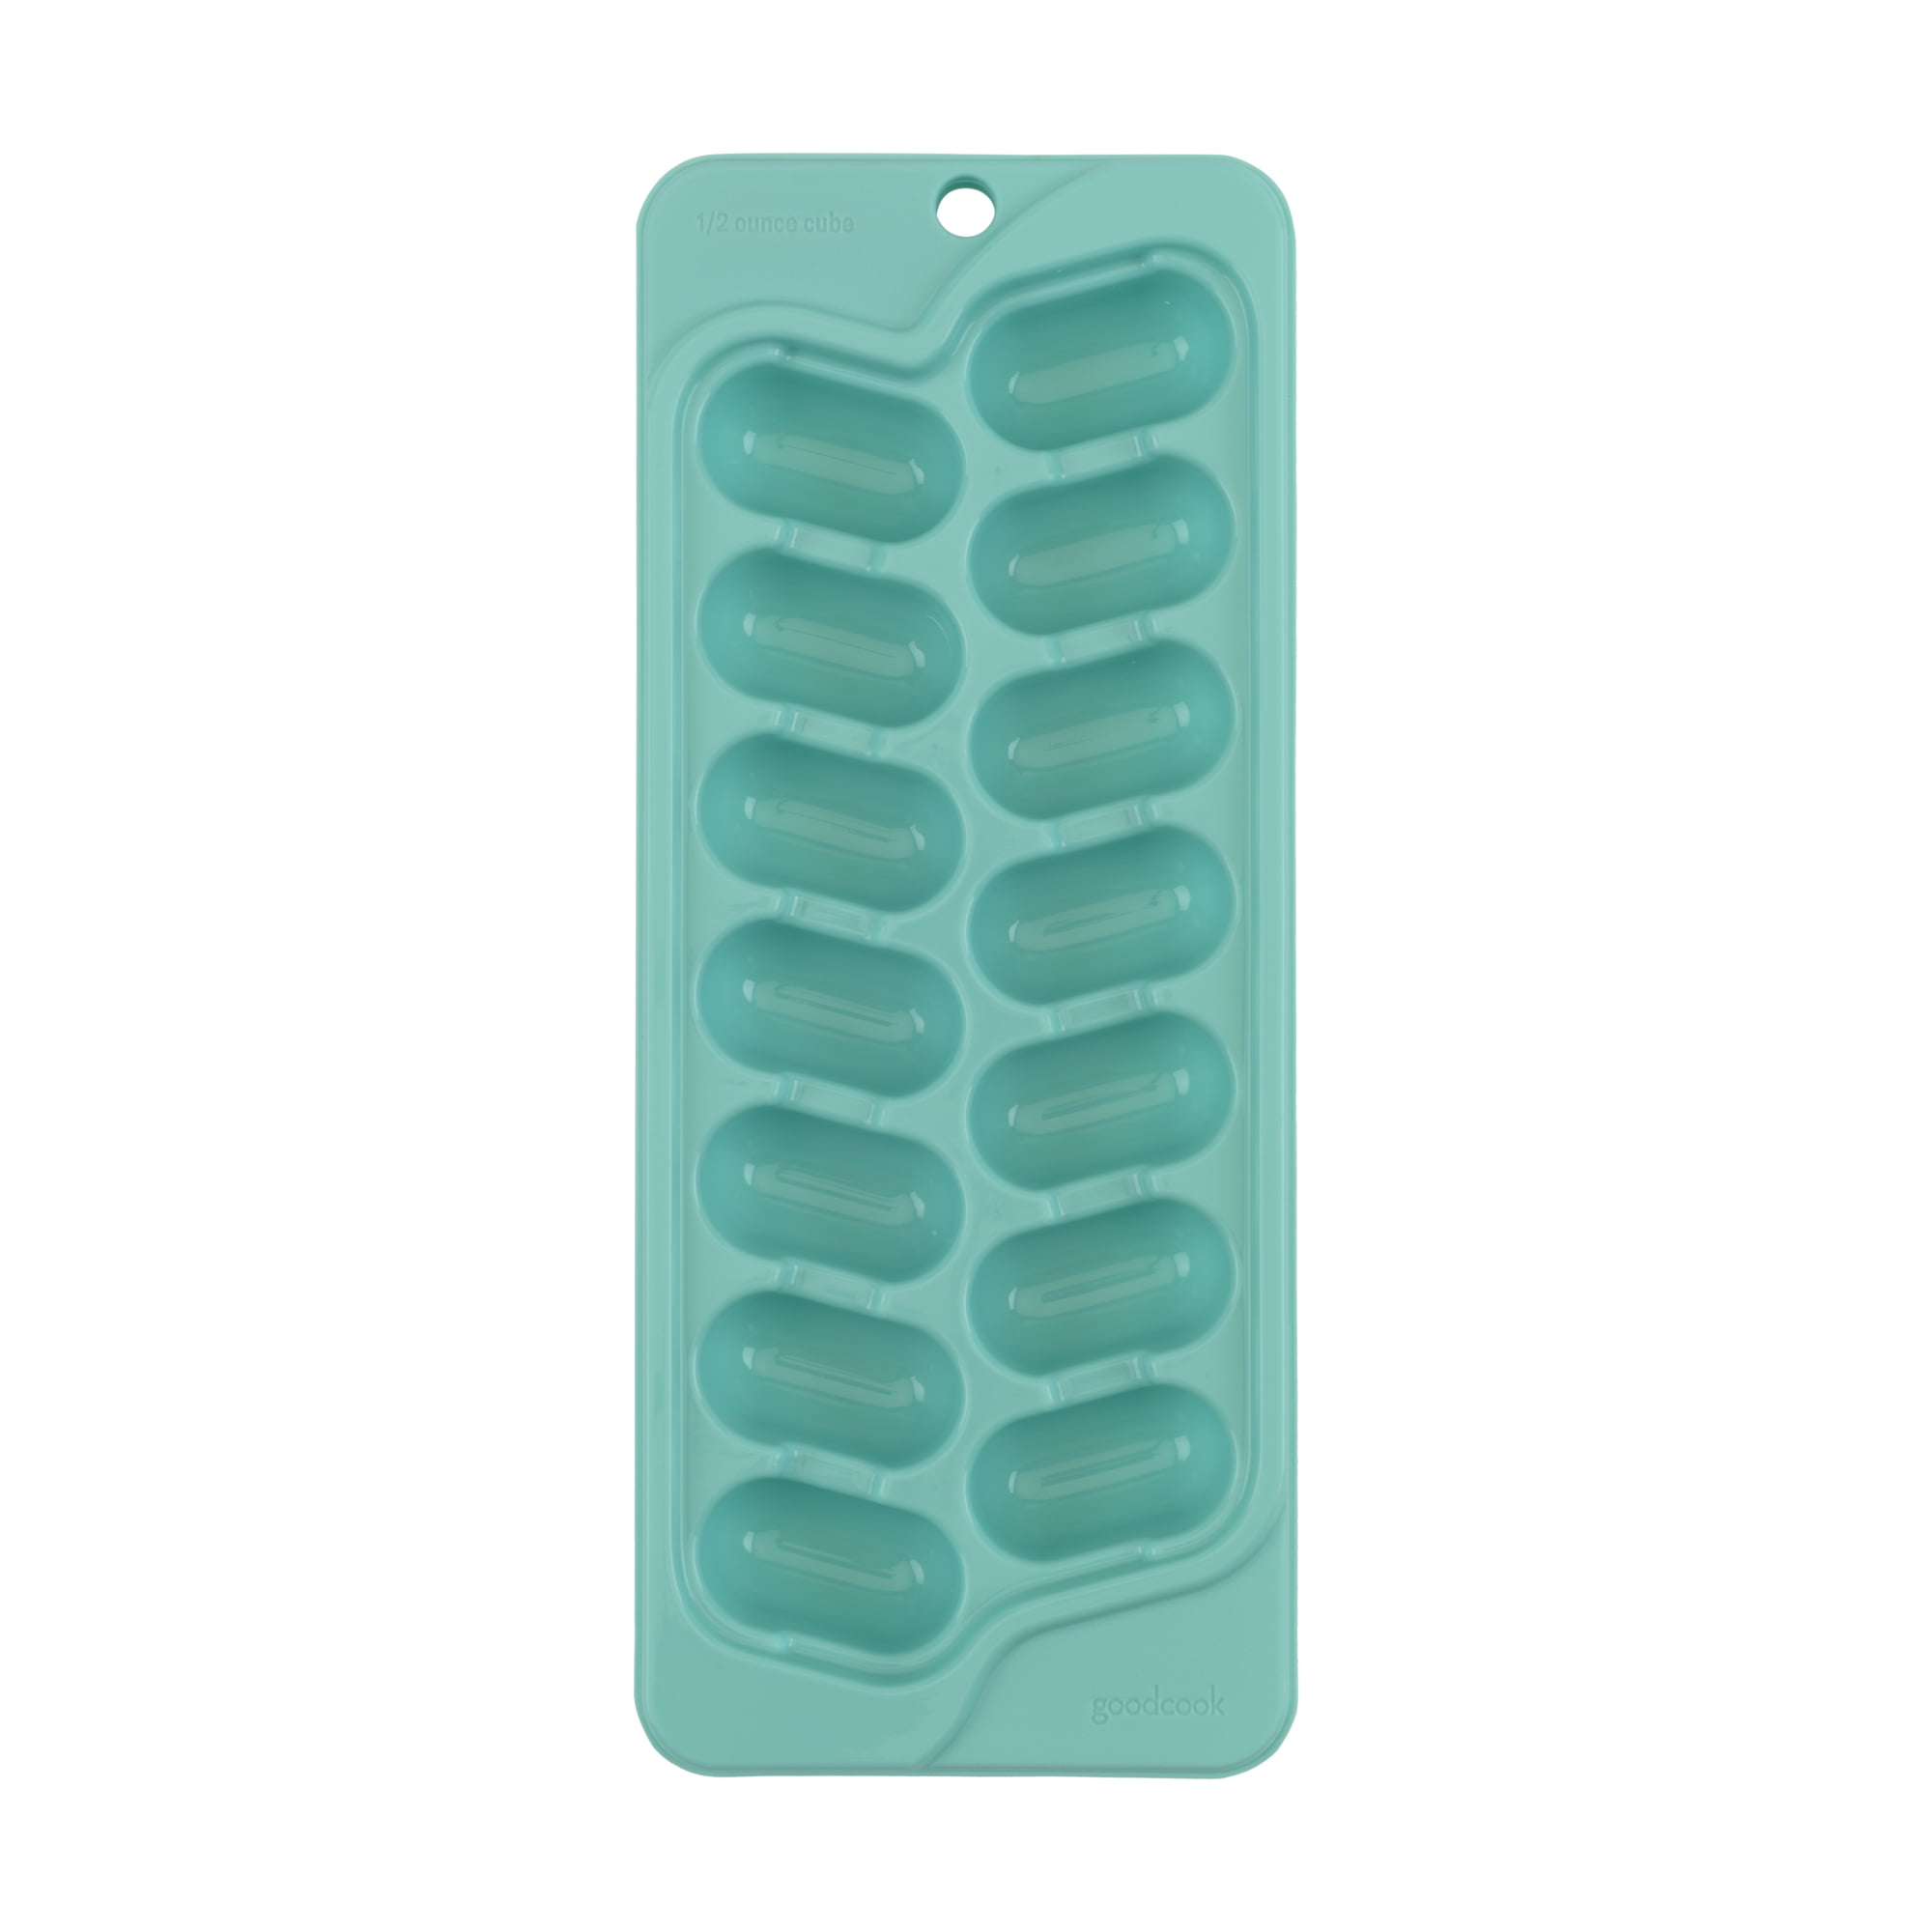 GoodCook PROfreshionals Pack of 2 Plastic Ice Cube Trays, Light Blue